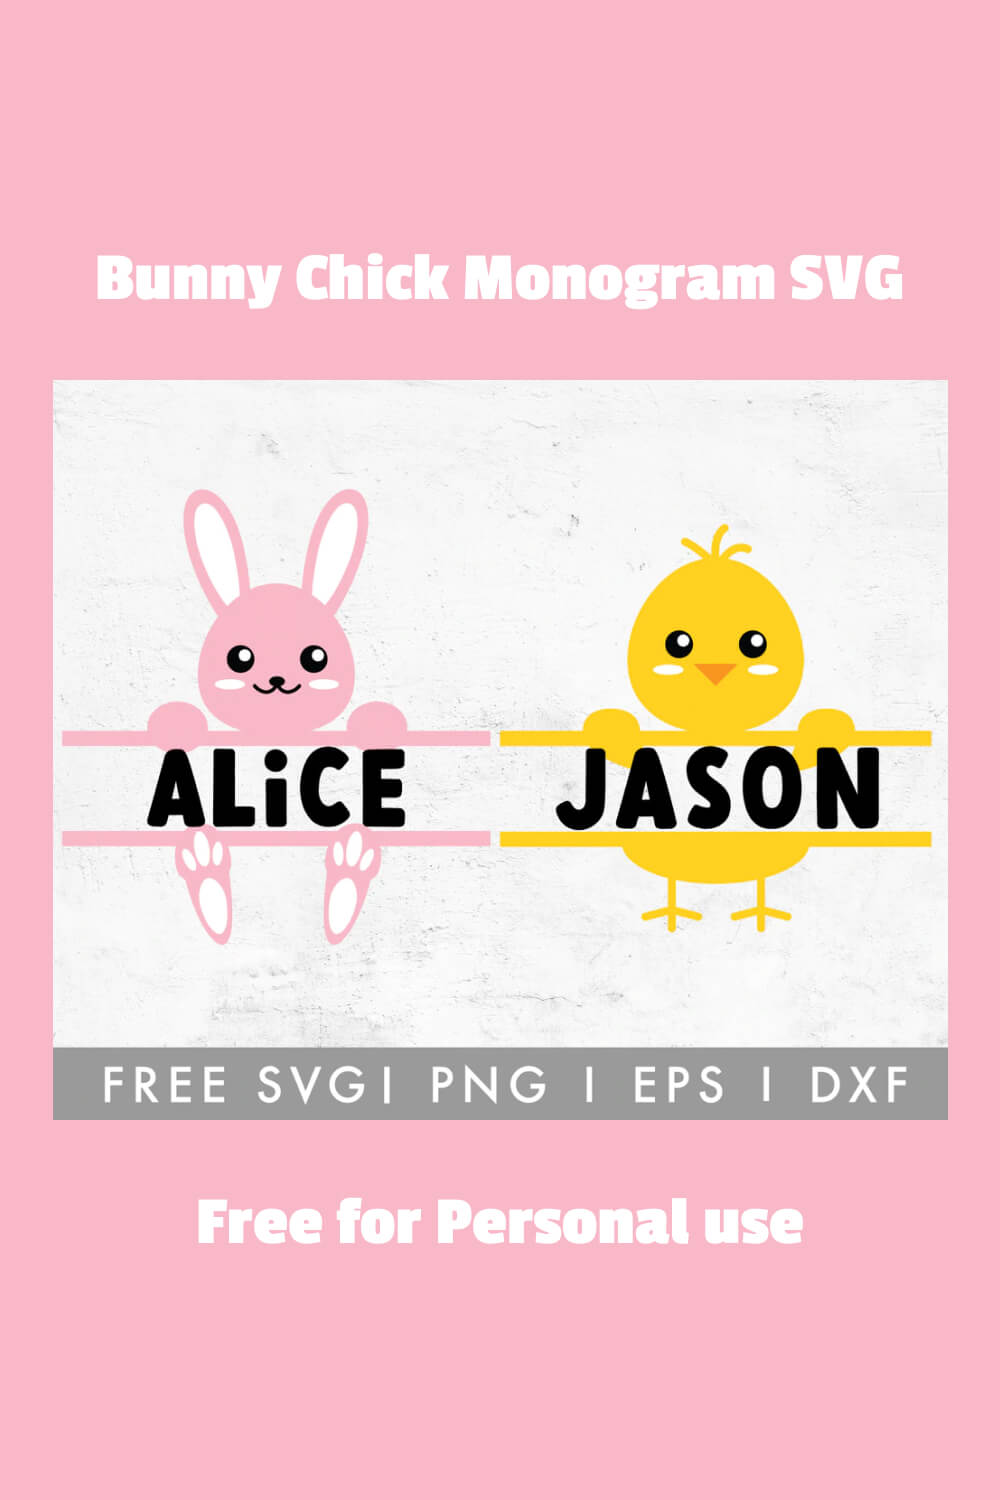 A pattern with the image of a pink rabbit with the inscription "Alice" and the image of a yellow chicken with the inscription "Jason".